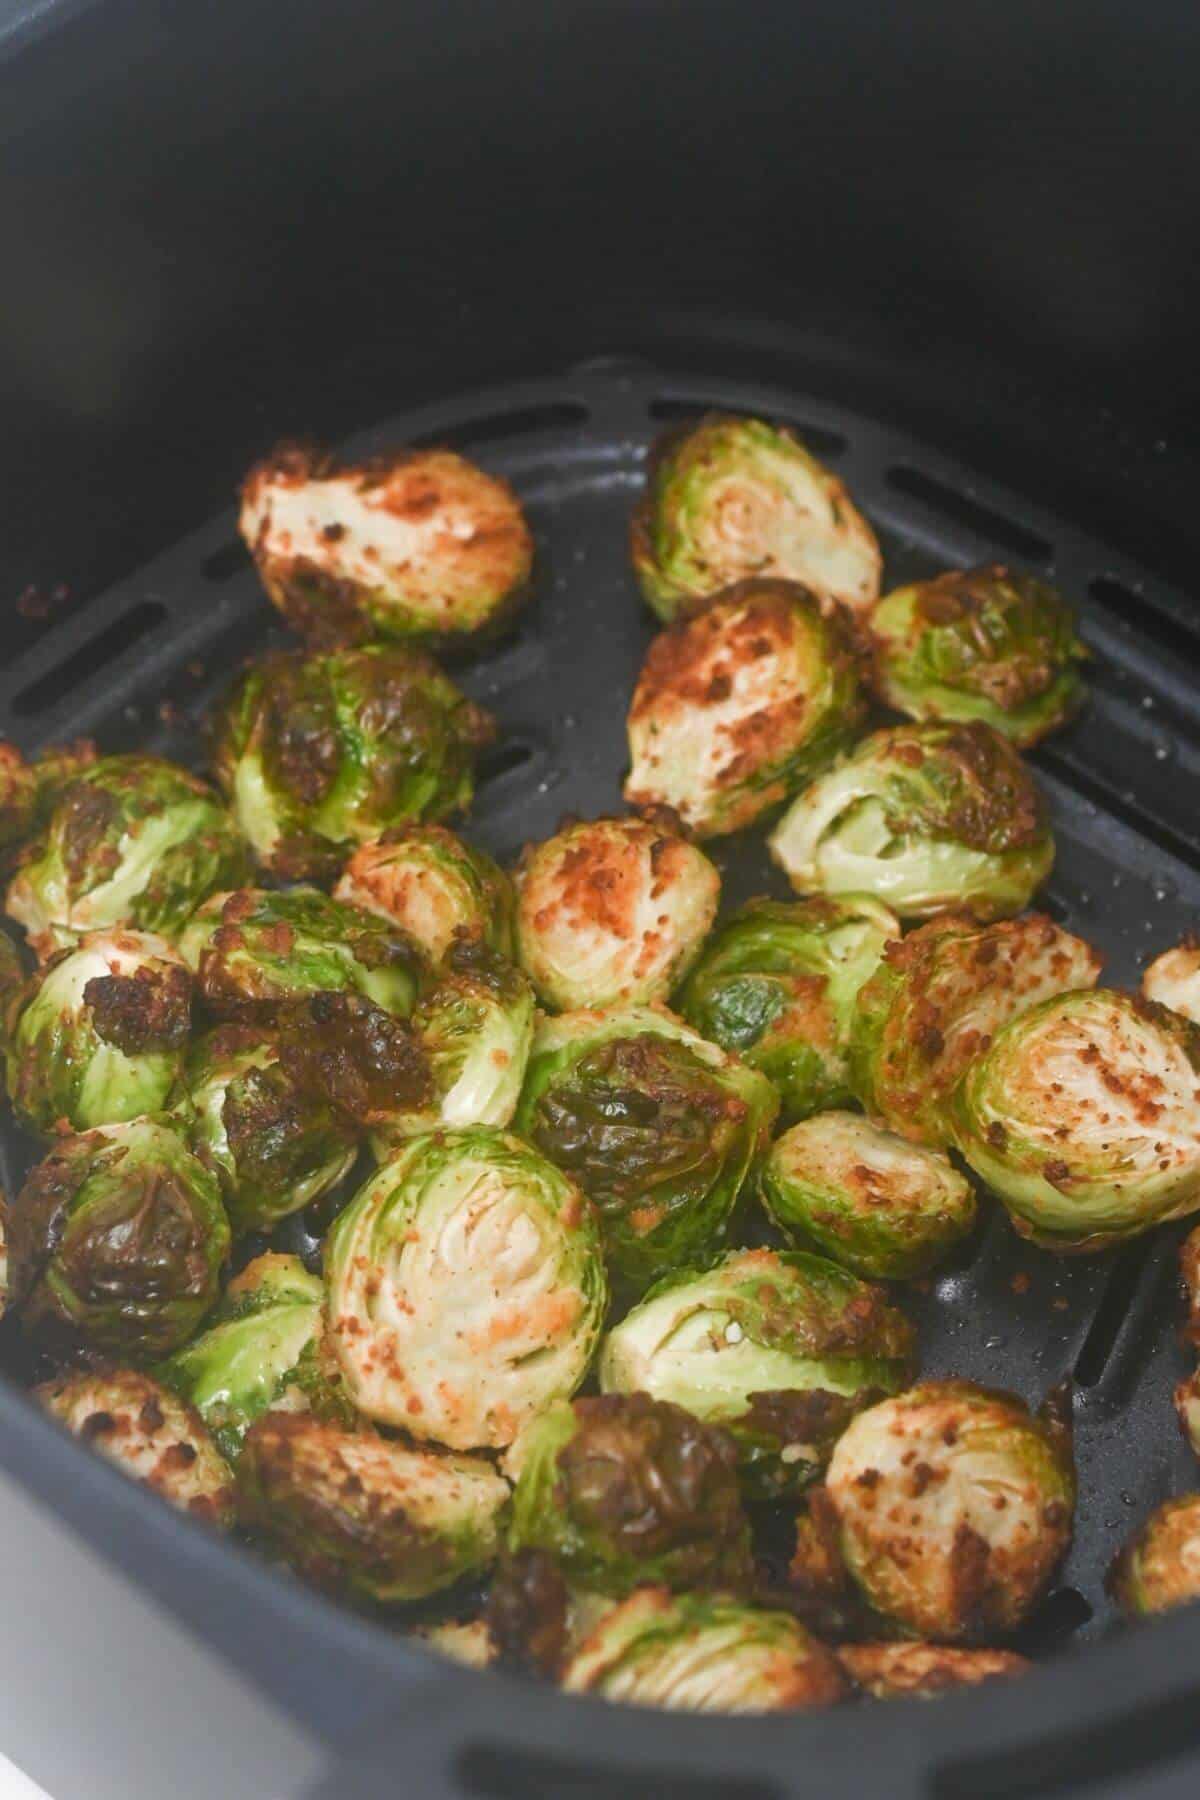 Roasted brussels sprouts in an air fryer.